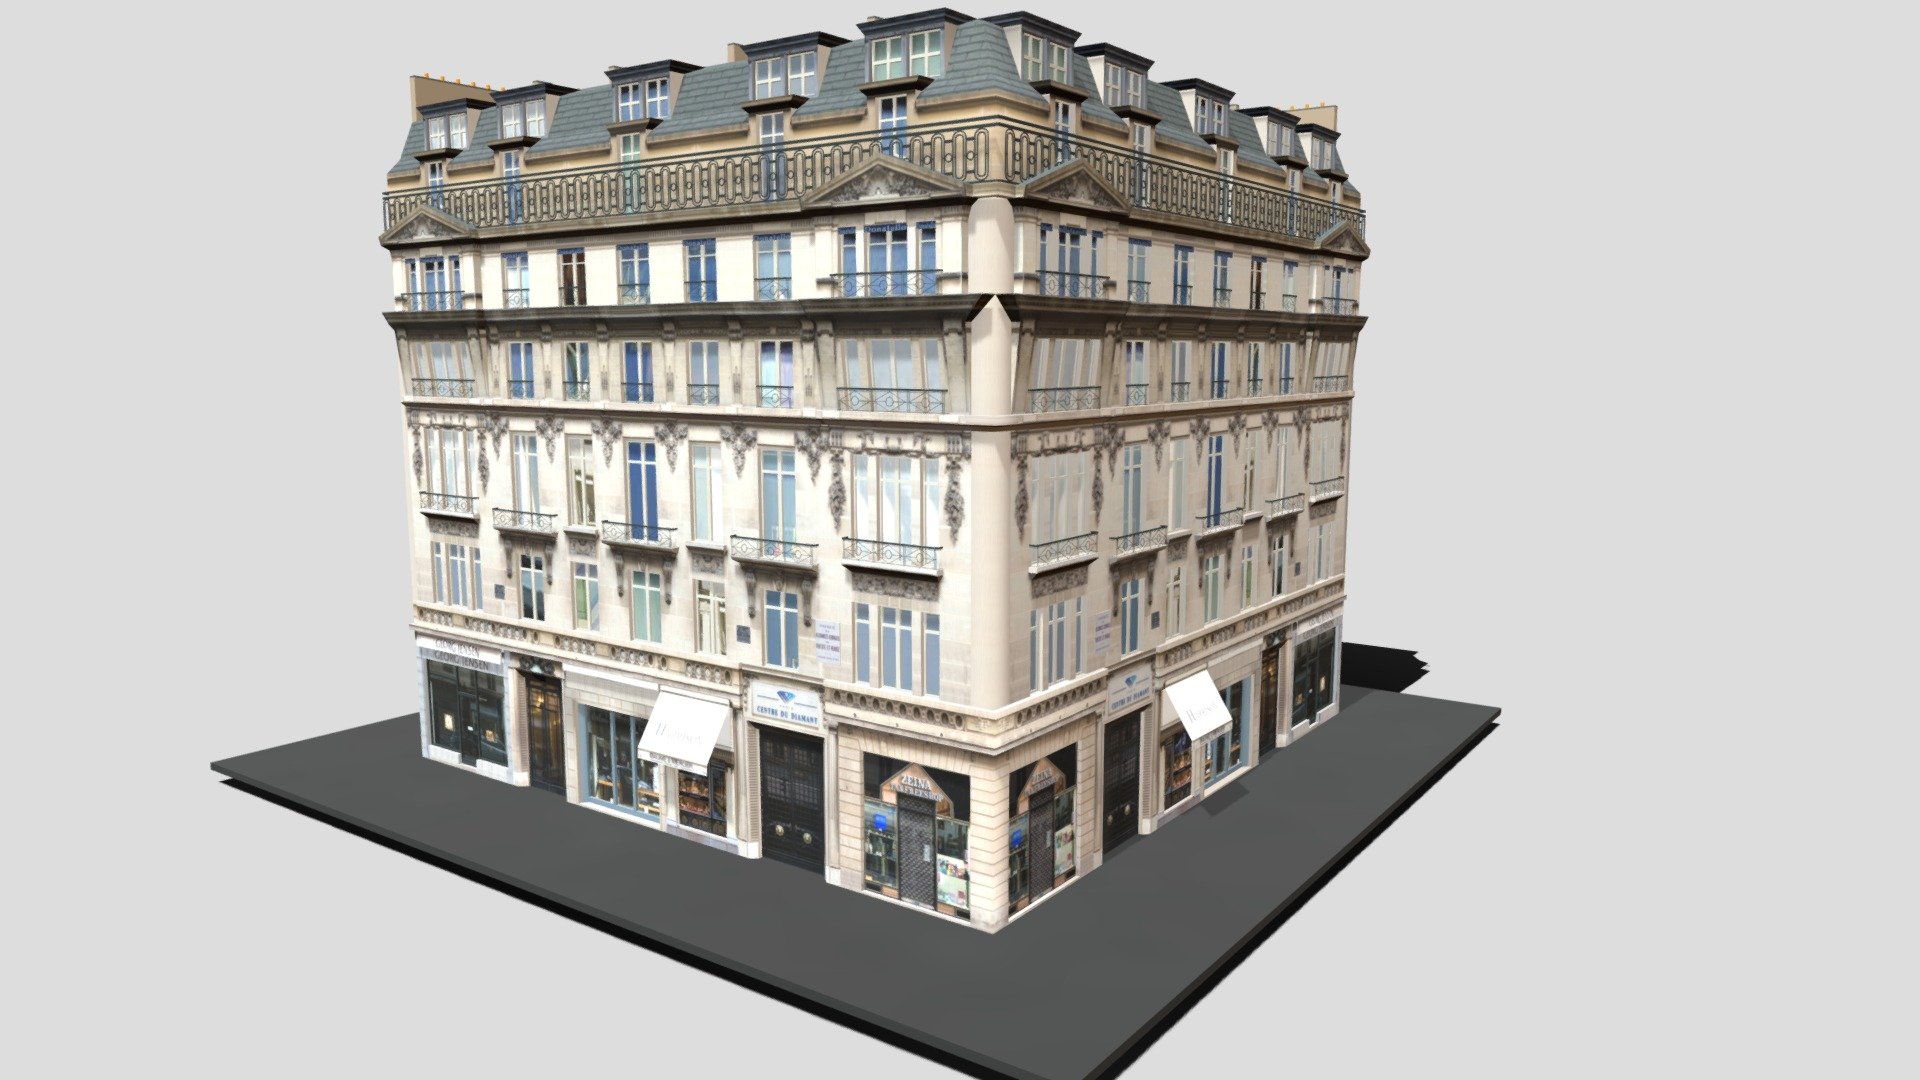 Typical Parisian Apartment Building 19
Originally created with 3ds Max 2015 and rendered in V-Ray 3.0. 

Total Poly Counts:
Poly Count = 38081
Vertex Count = 46321

https://nuralam3d.blogspot.com/2021/09/typical-parisian-apartment-building-19.html - Typical Parisian Apartment Building 19 - 3D model by nuralam018 3d model